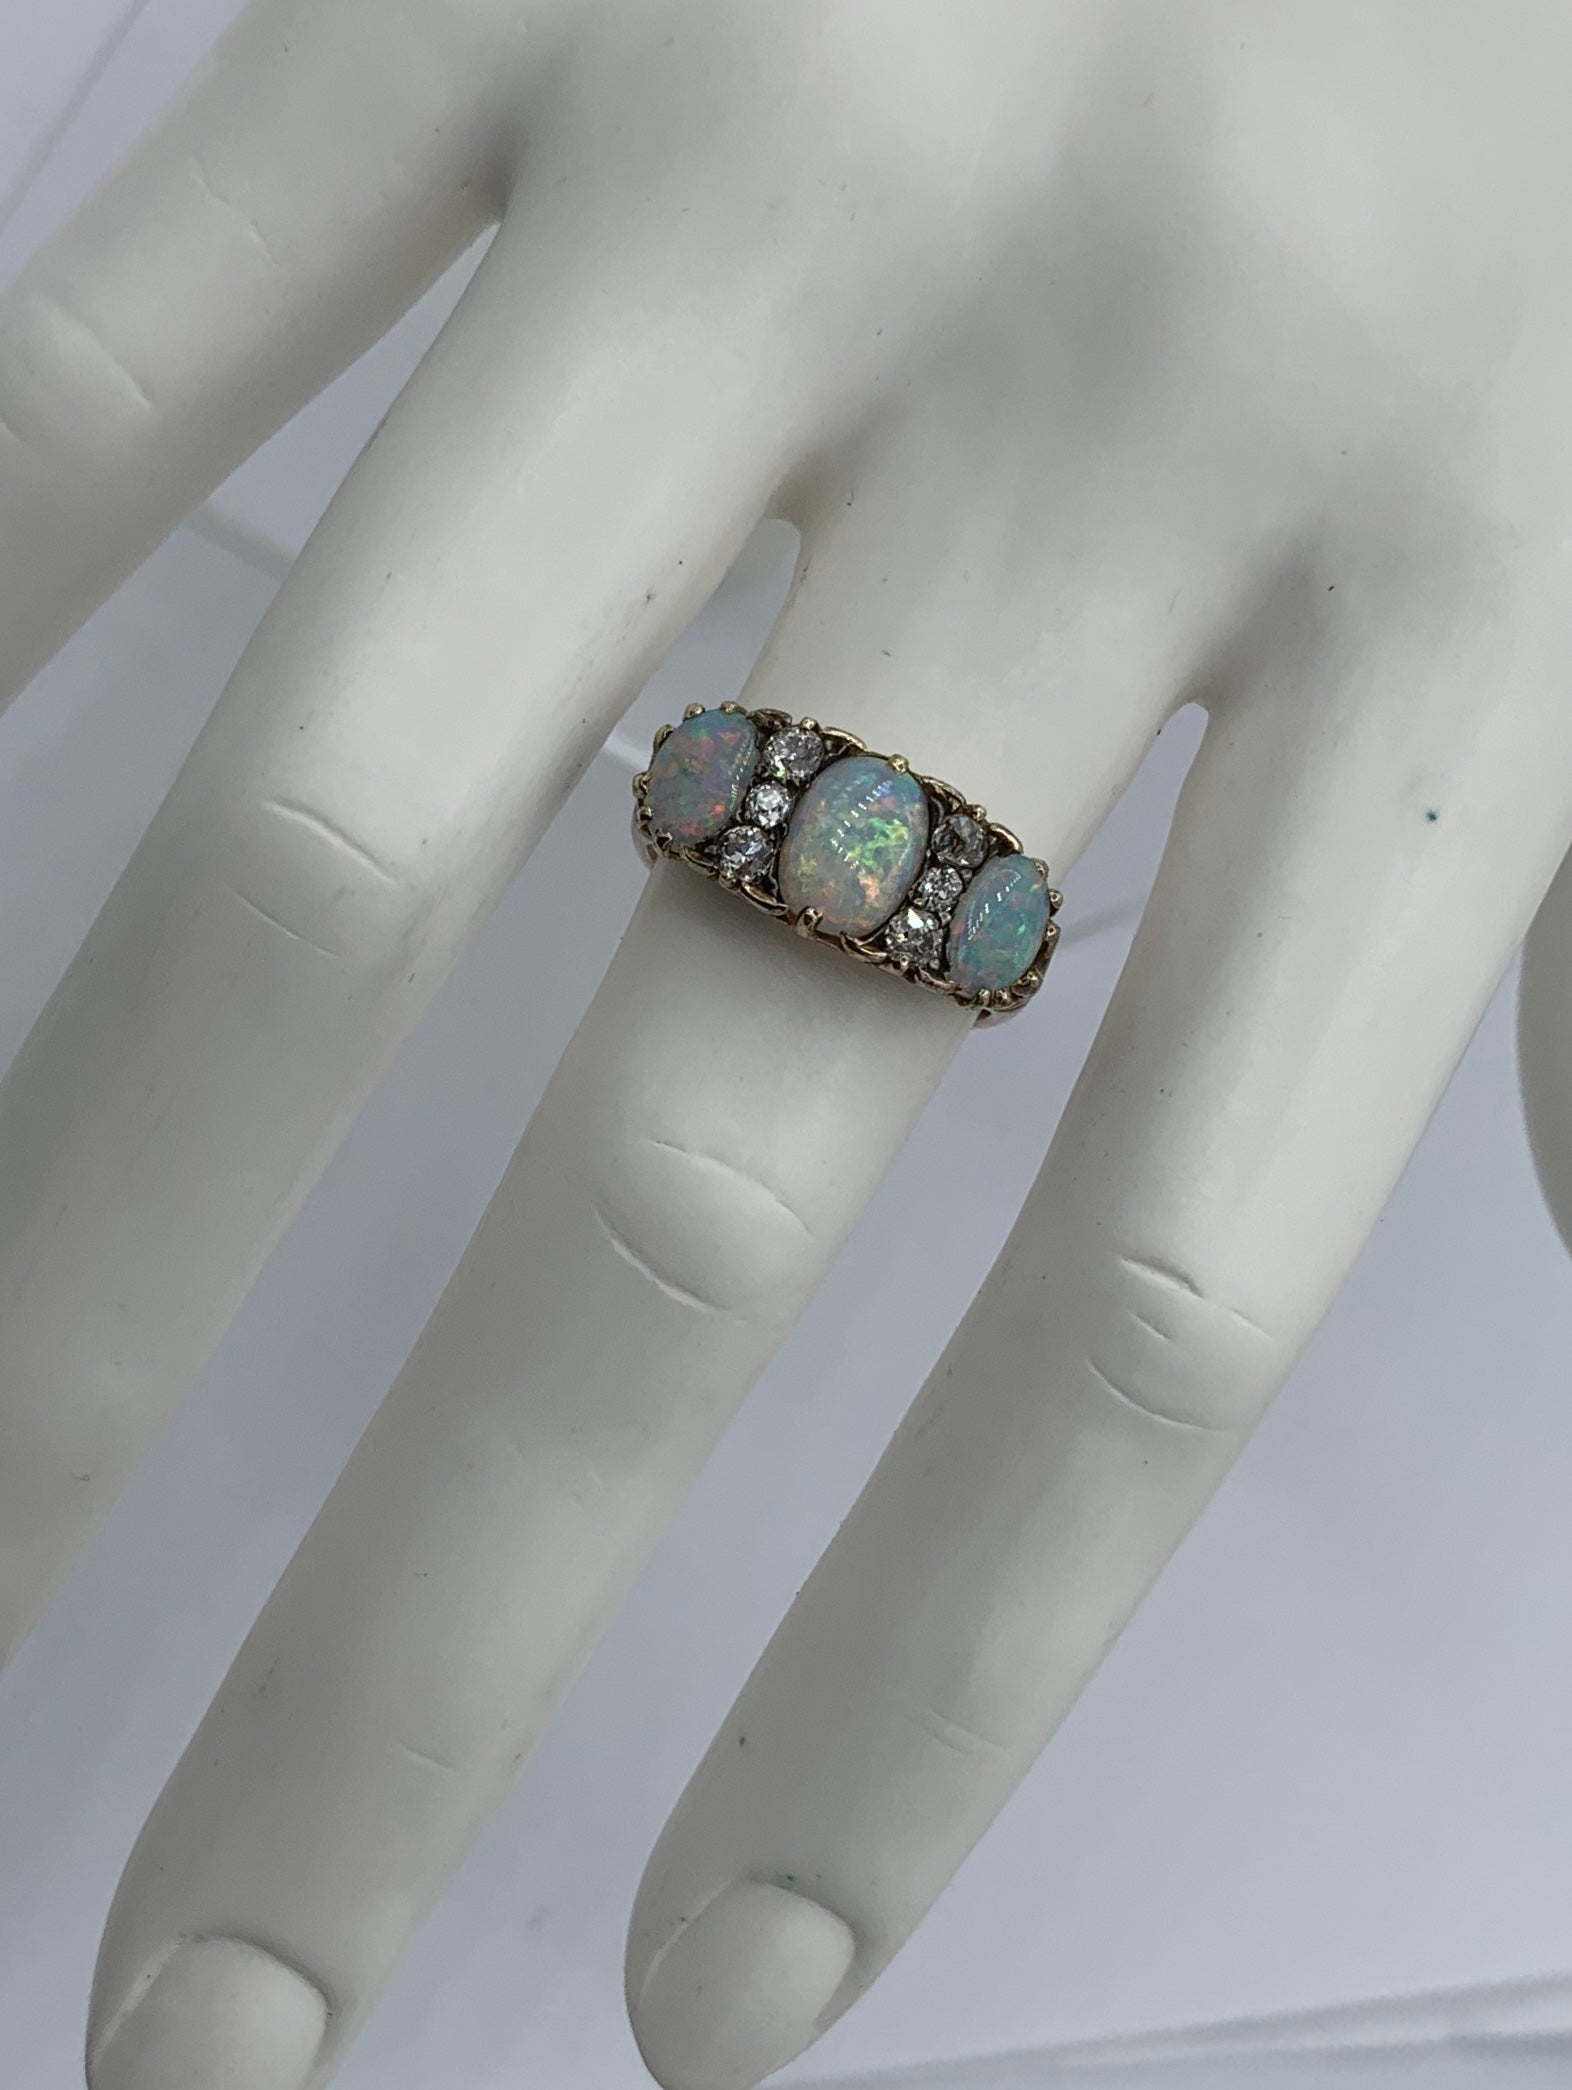 This is an Antique Victorian - Edwardian Ring with three gorgeous natural oval Opals of incredible color and stunning beauty. The three Opal gems are accented by six sparkling antique Old Mine Cut Diamonds.   The jewels are set in a scroll motif